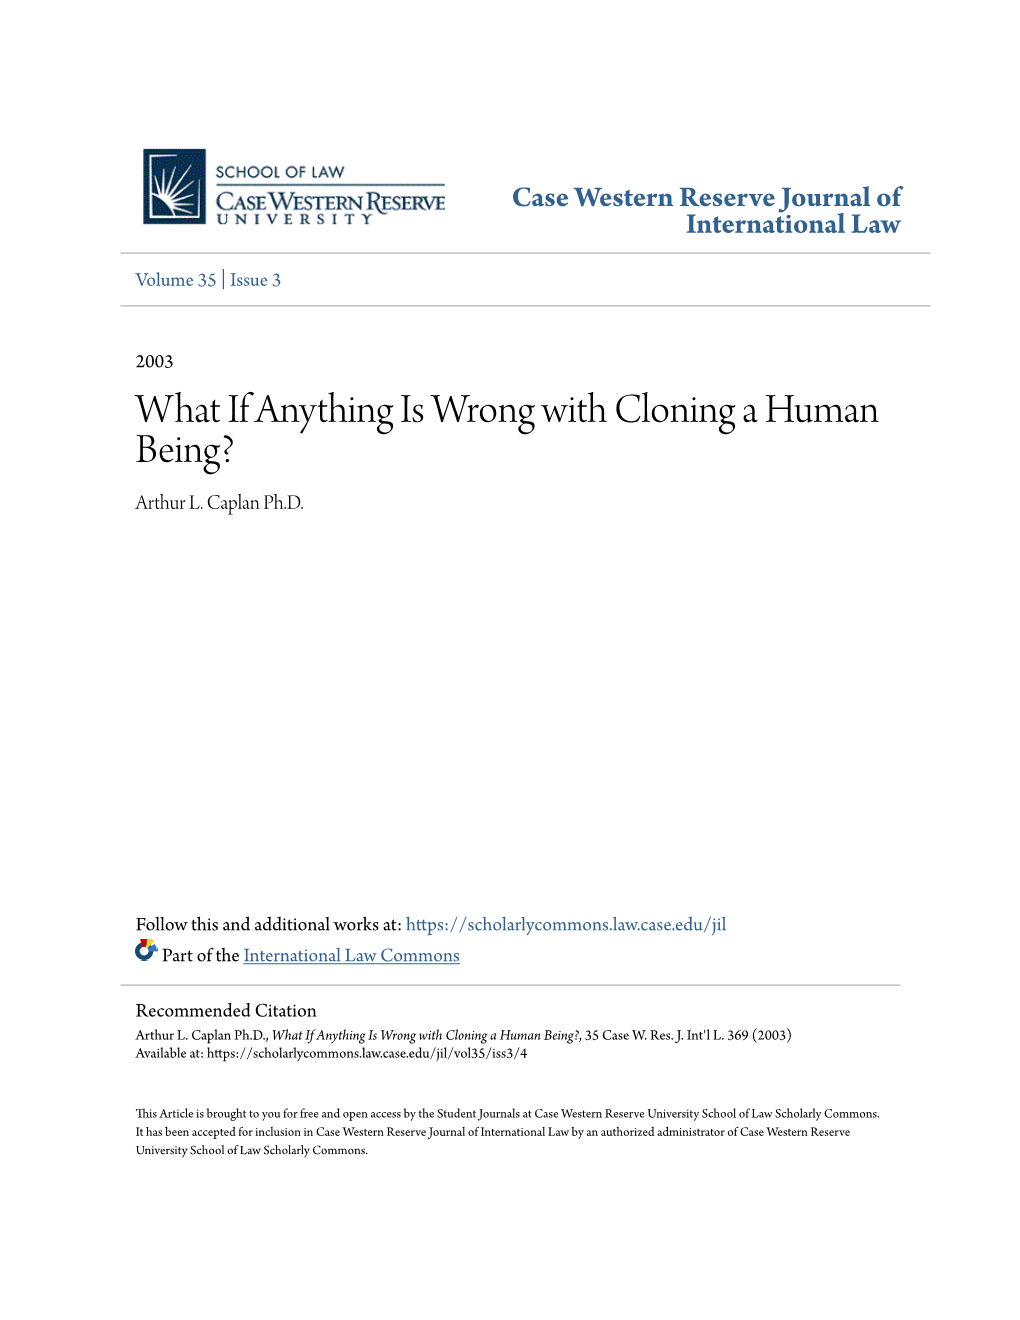 What If Anything Is Wrong with Cloning a Human Being? Arthur L